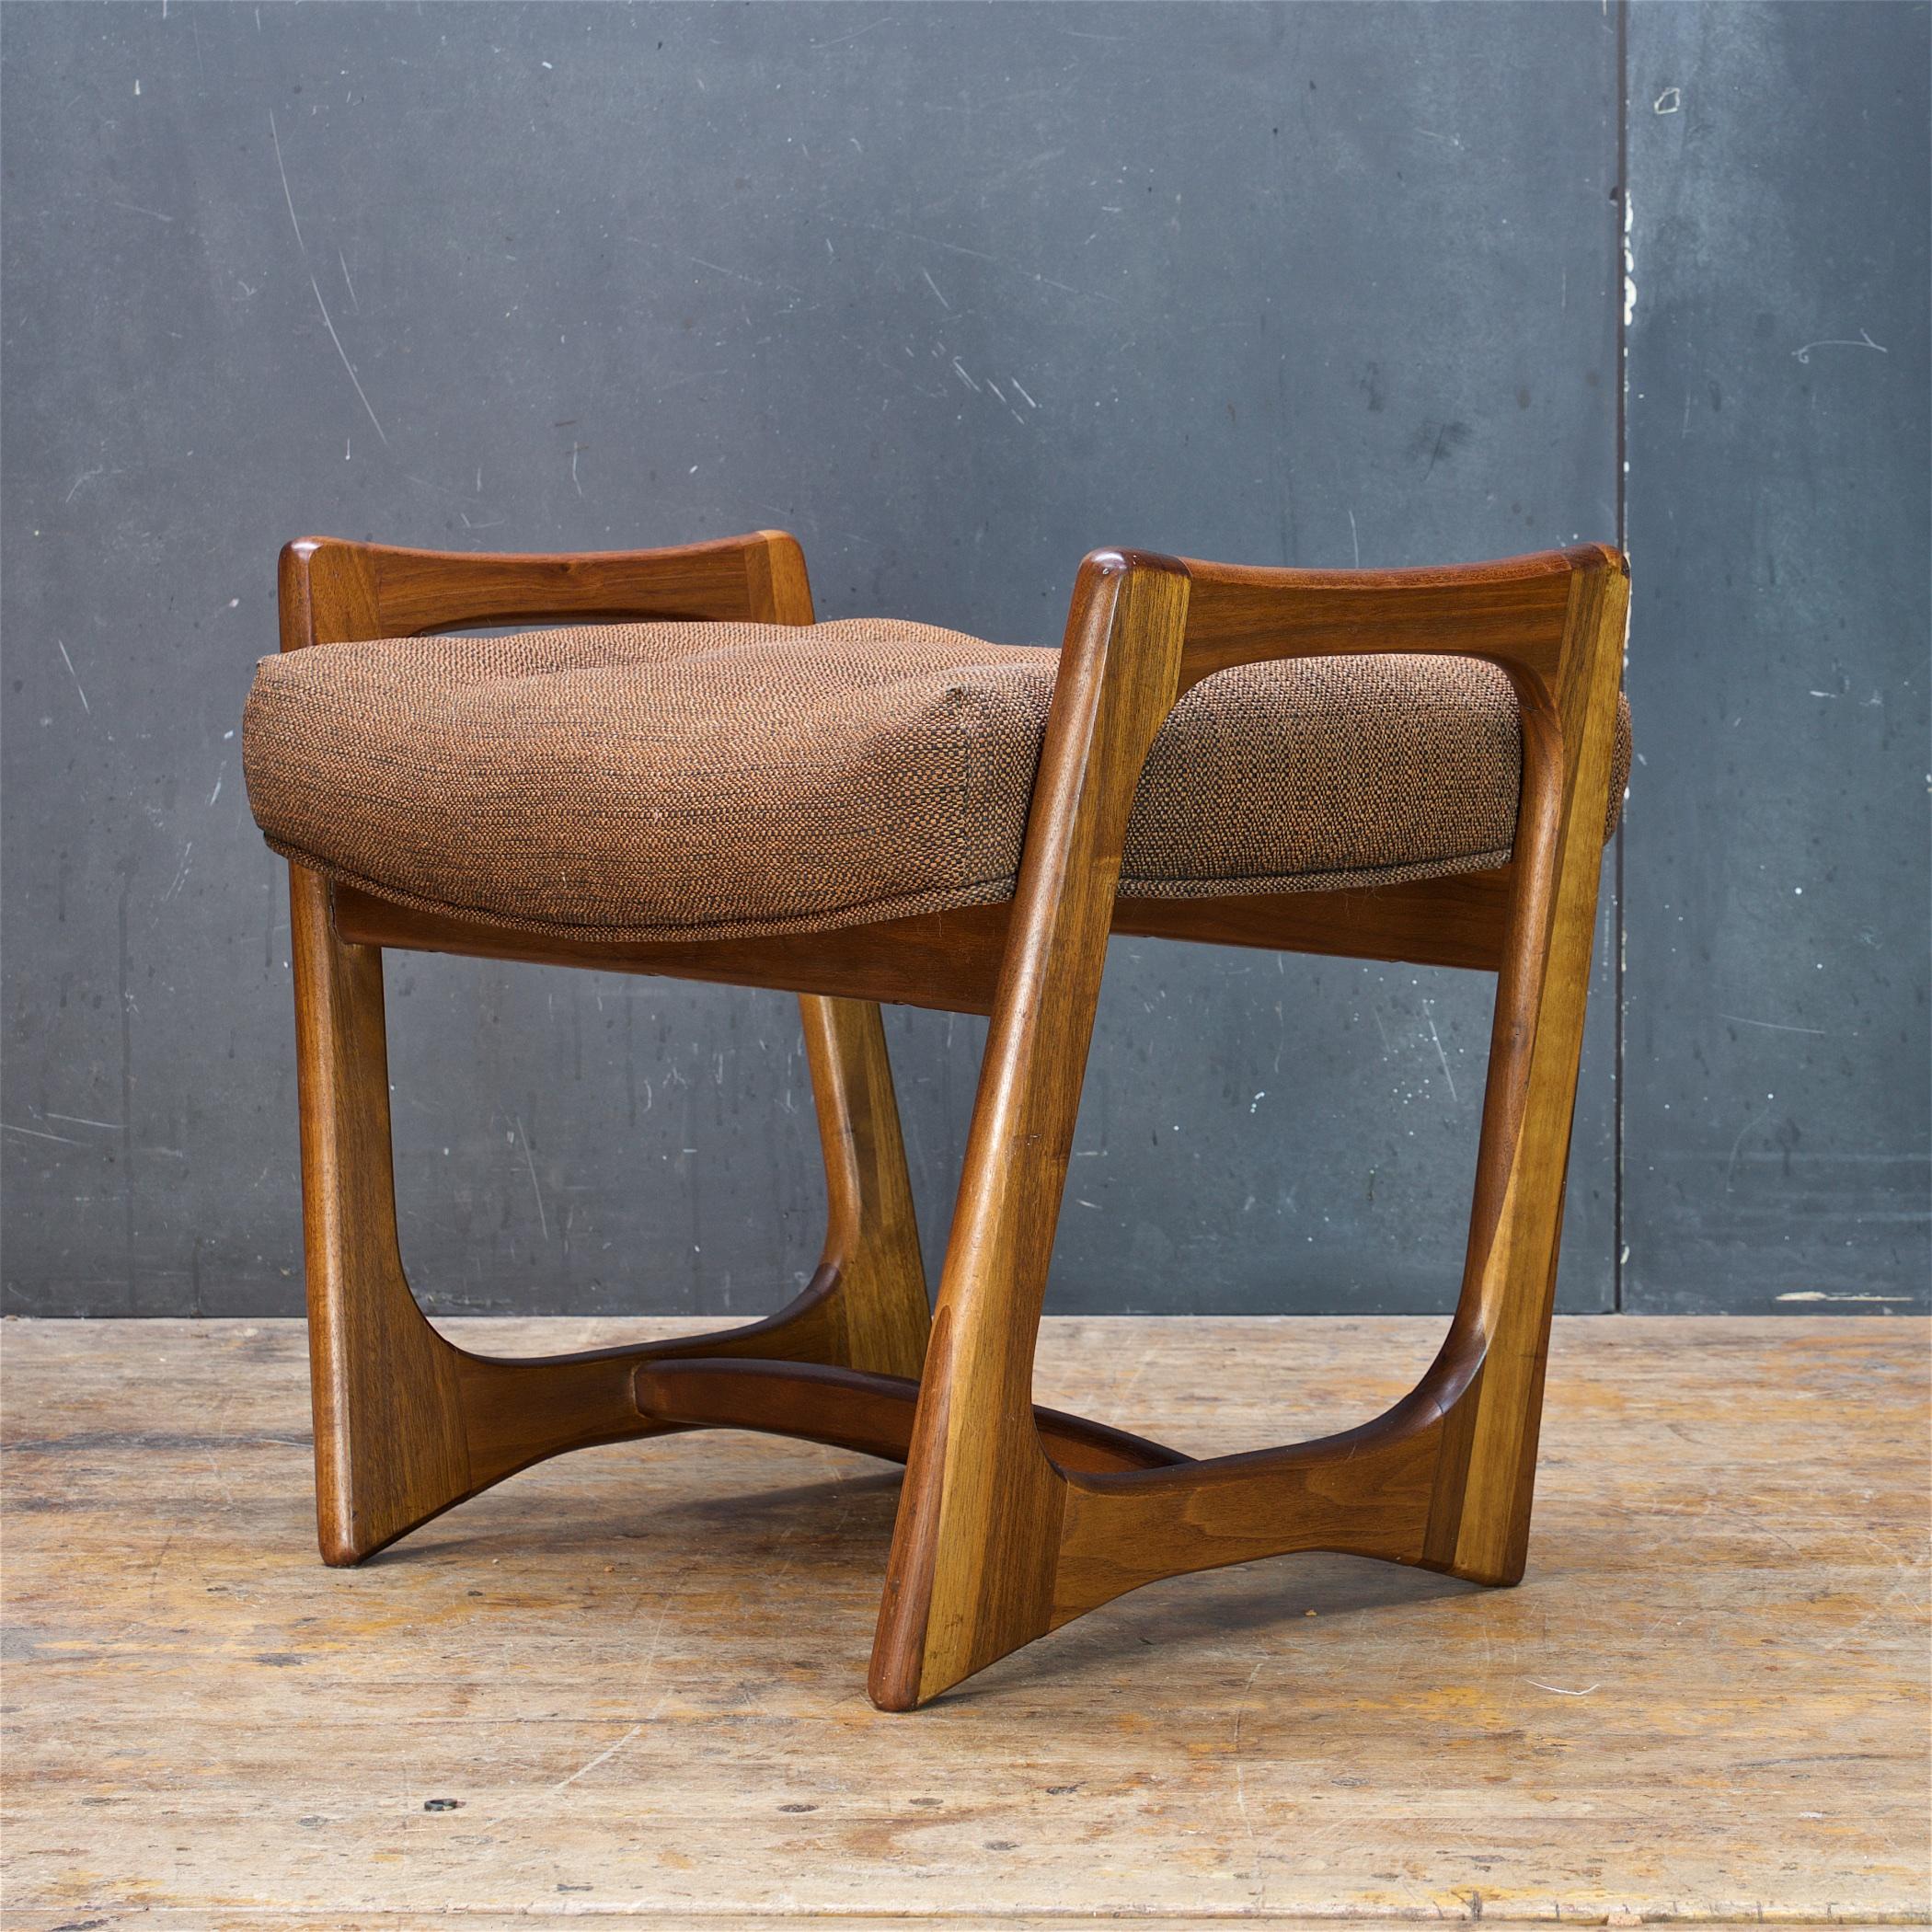 Architectural form, with staved American Walnut frame, and beautiful and contrasting wood grains. 
Measurements: W 23 x D 16.5 x H 18.5 and Seat H 16 in.

